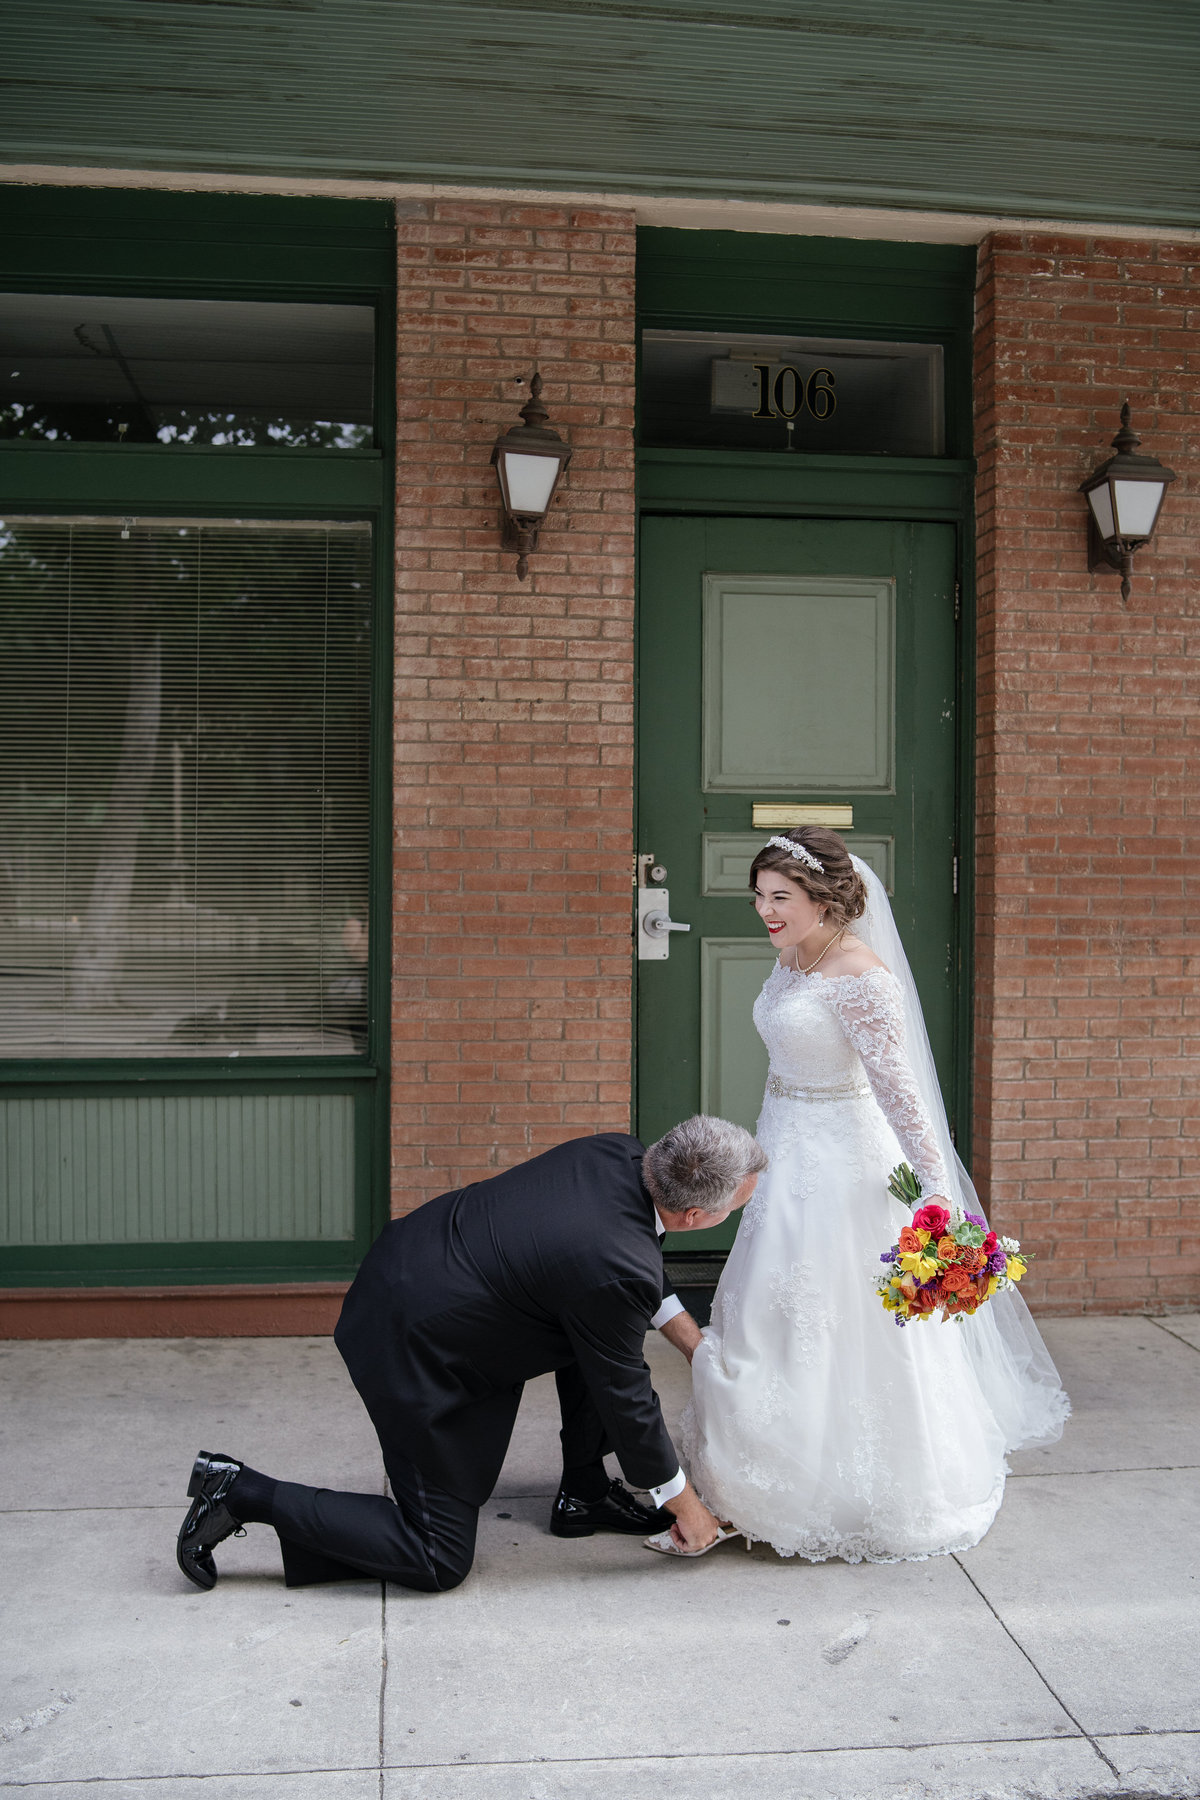 Father of bride putting a sixpence in brides shoe just before wedding ceremony at The Spire venue in downtown San Antonio